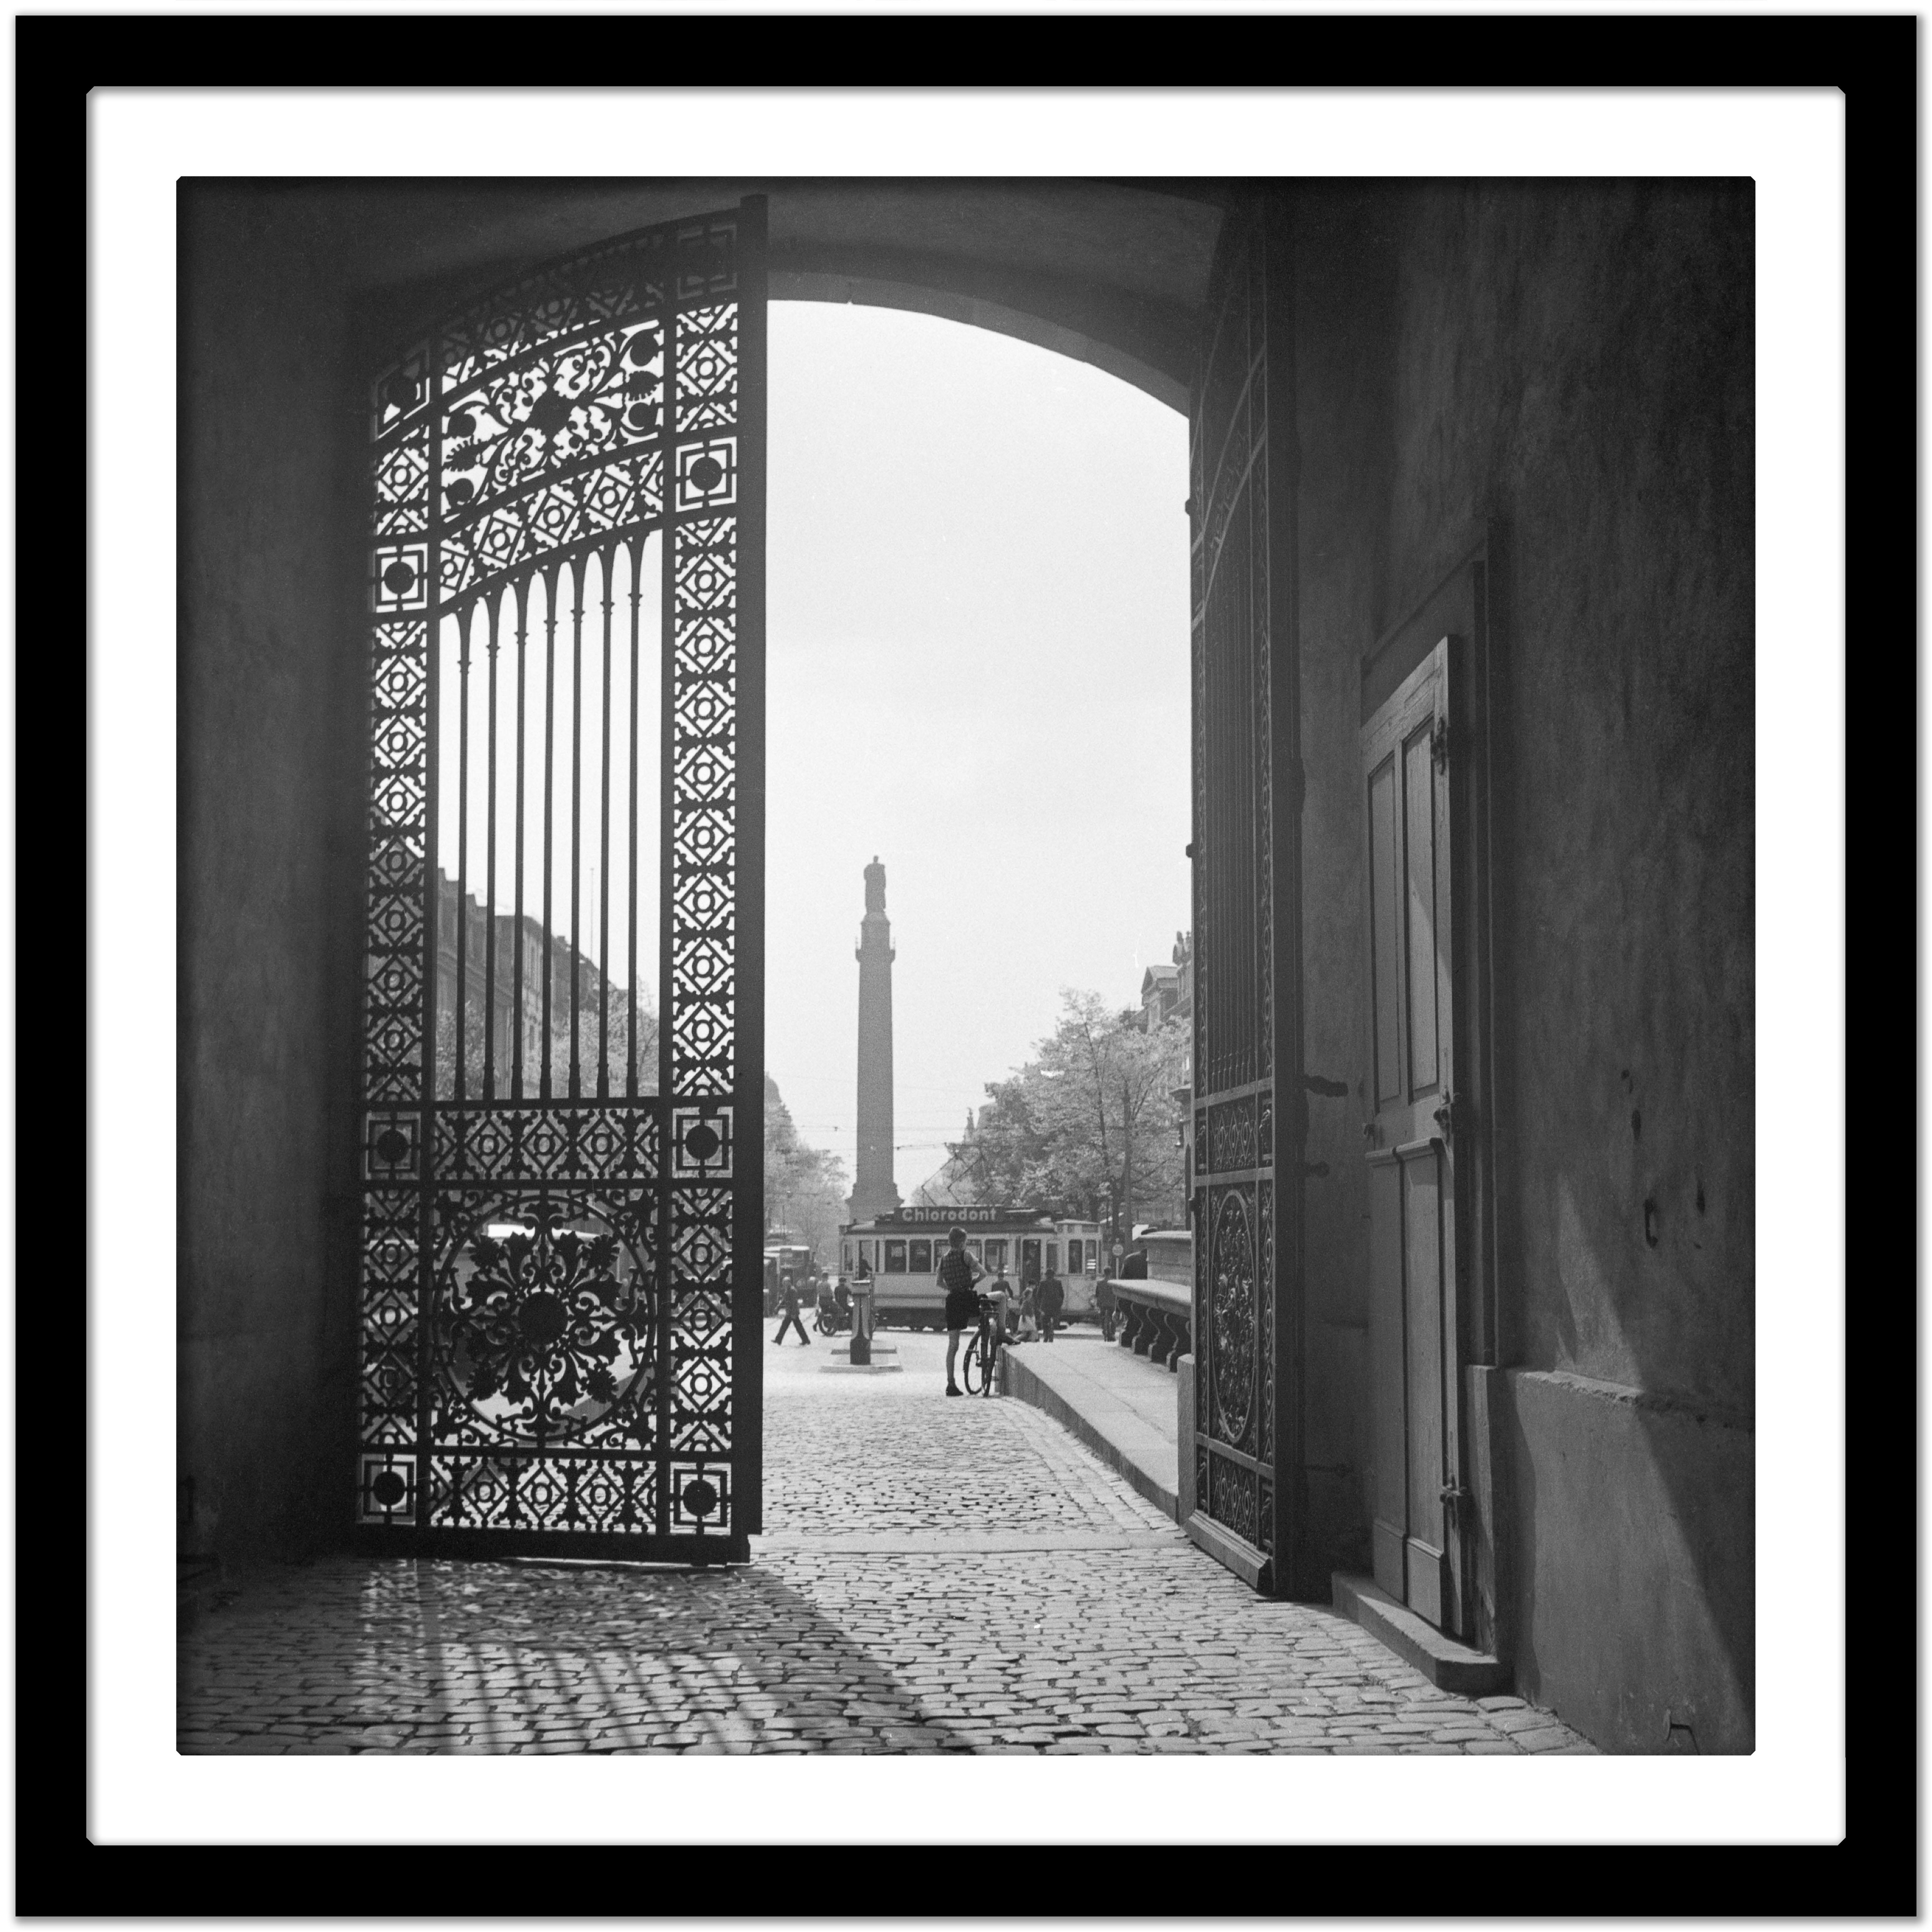 View from iron gate to city life Darmstadt, Germany 1938 Printed Later  - Black Black and White Photograph by Karl Heinrich Lämmel